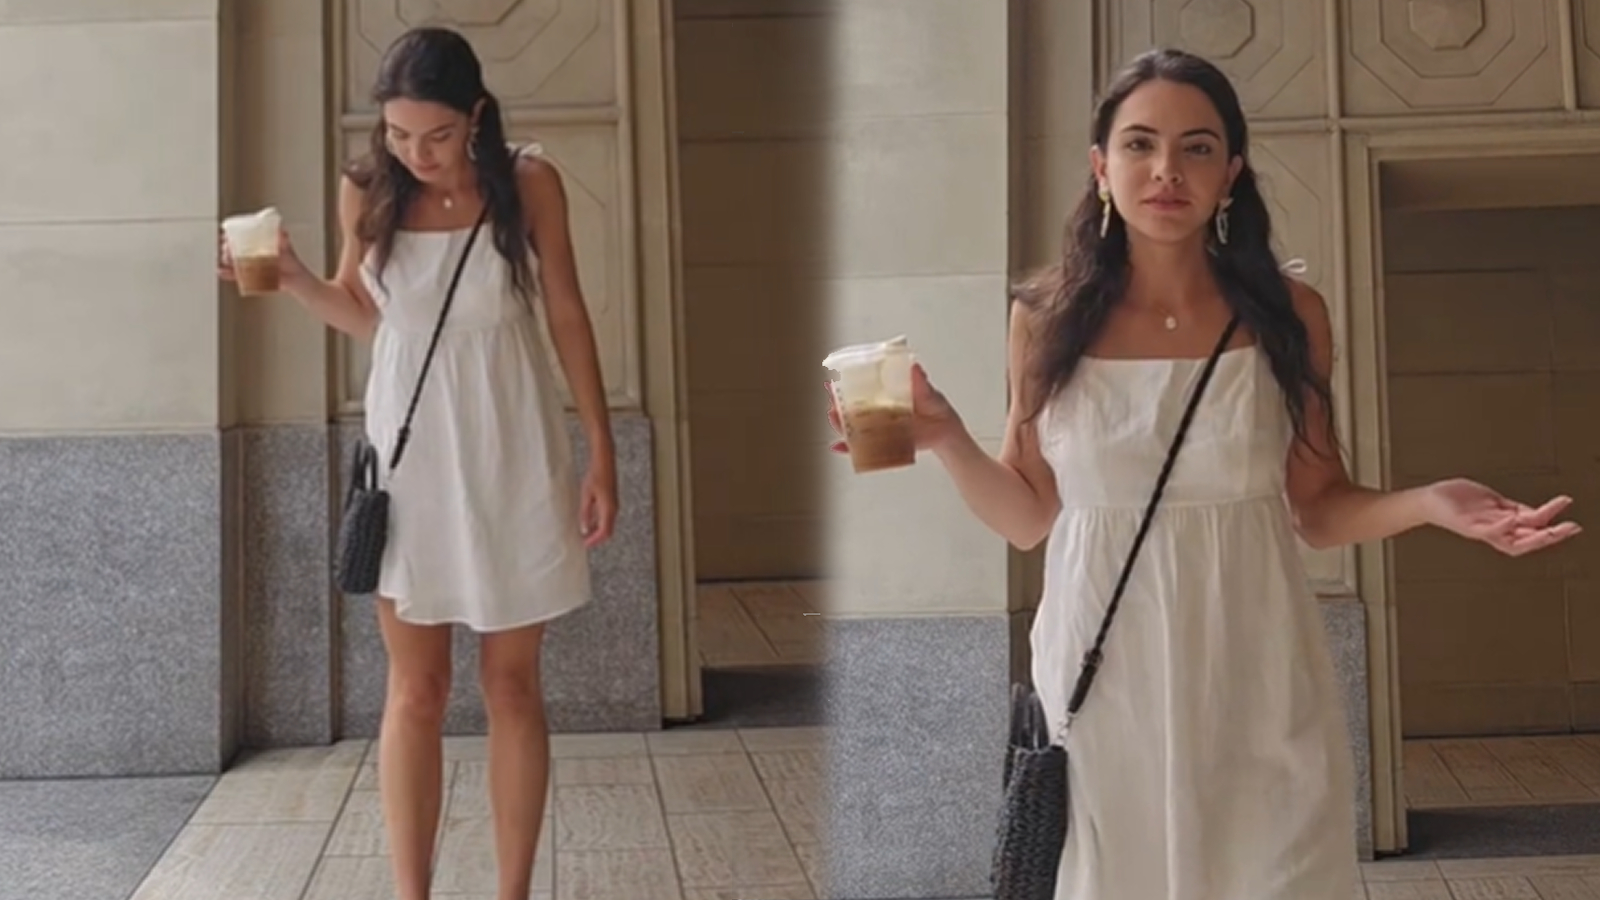 Internet applauds stranger for randomly criticizing New Yorker’s outfit